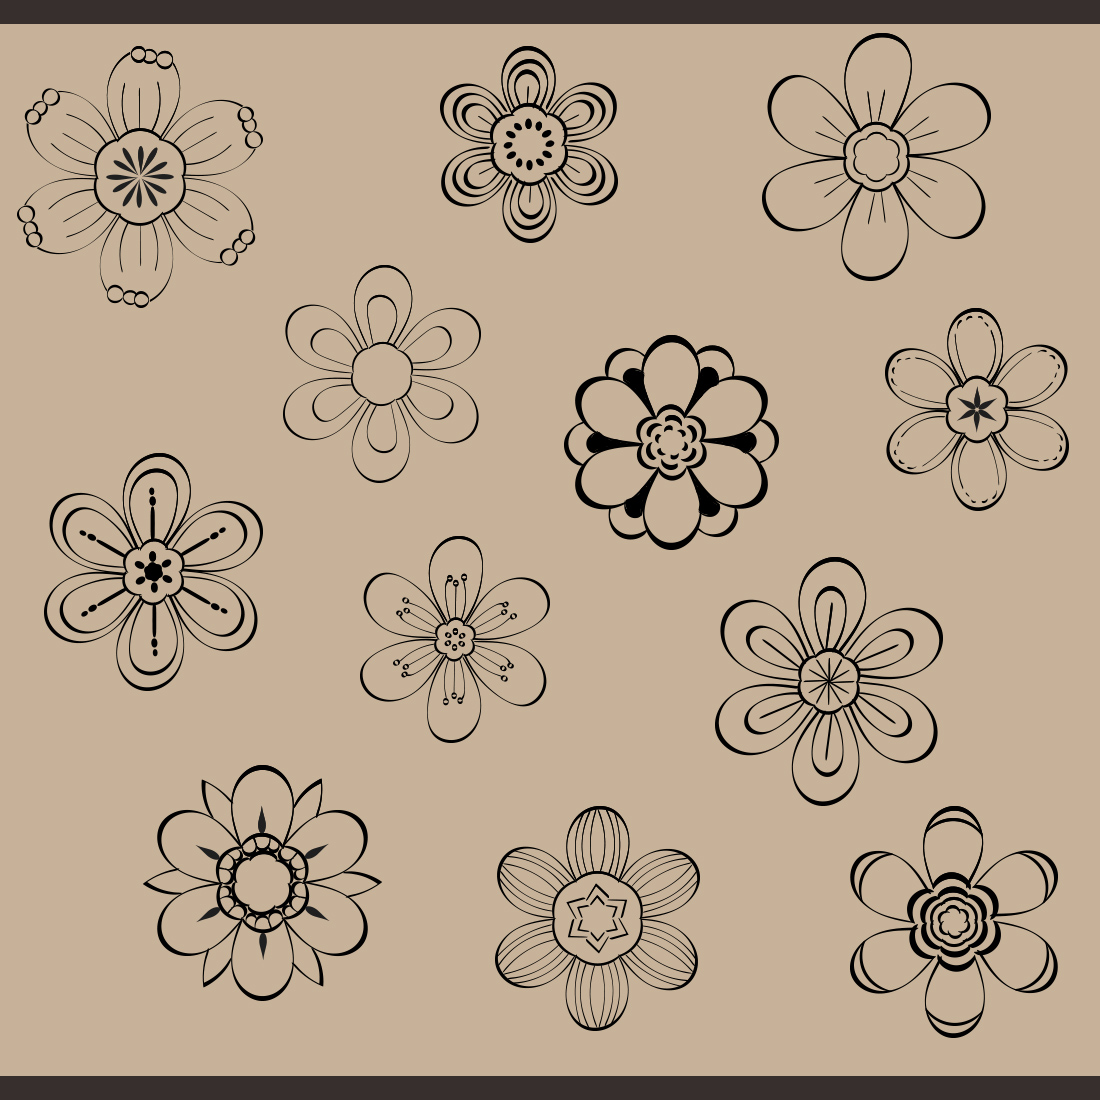 Flower Art Drawing With Line-Art cover image.